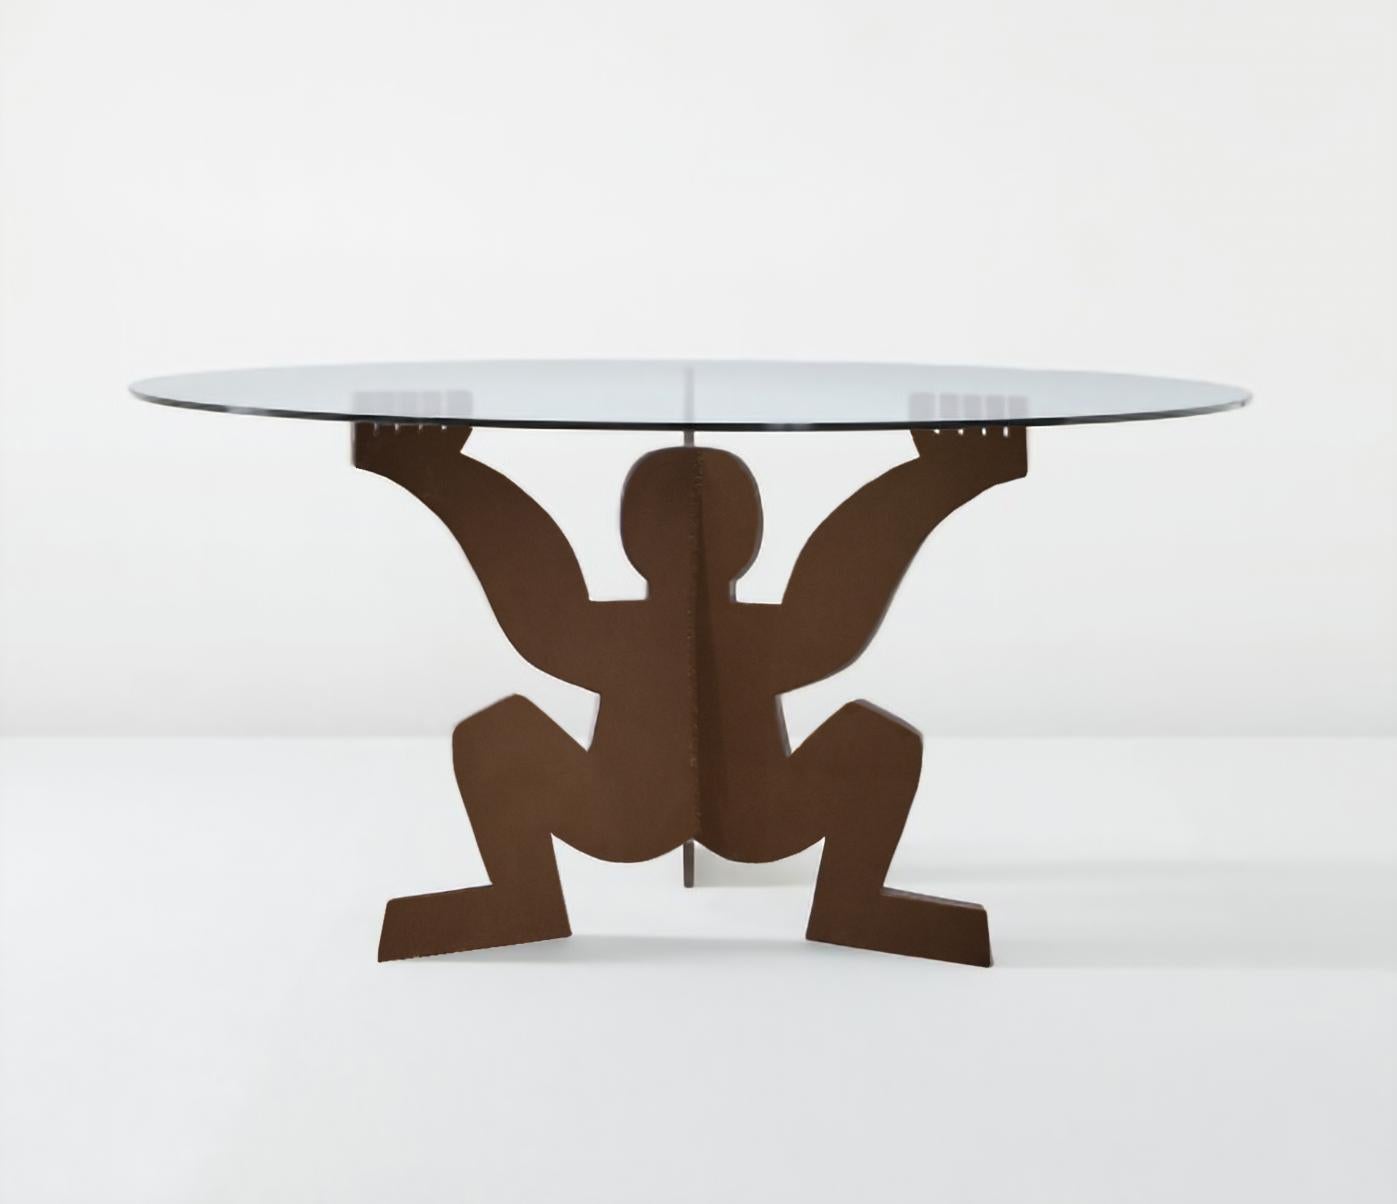 Dining table designed by Maurizio Cattelan in 1991 as a gift for Dilmos. 
Composed of a glass top and a base in crude iron depicting the form of the 